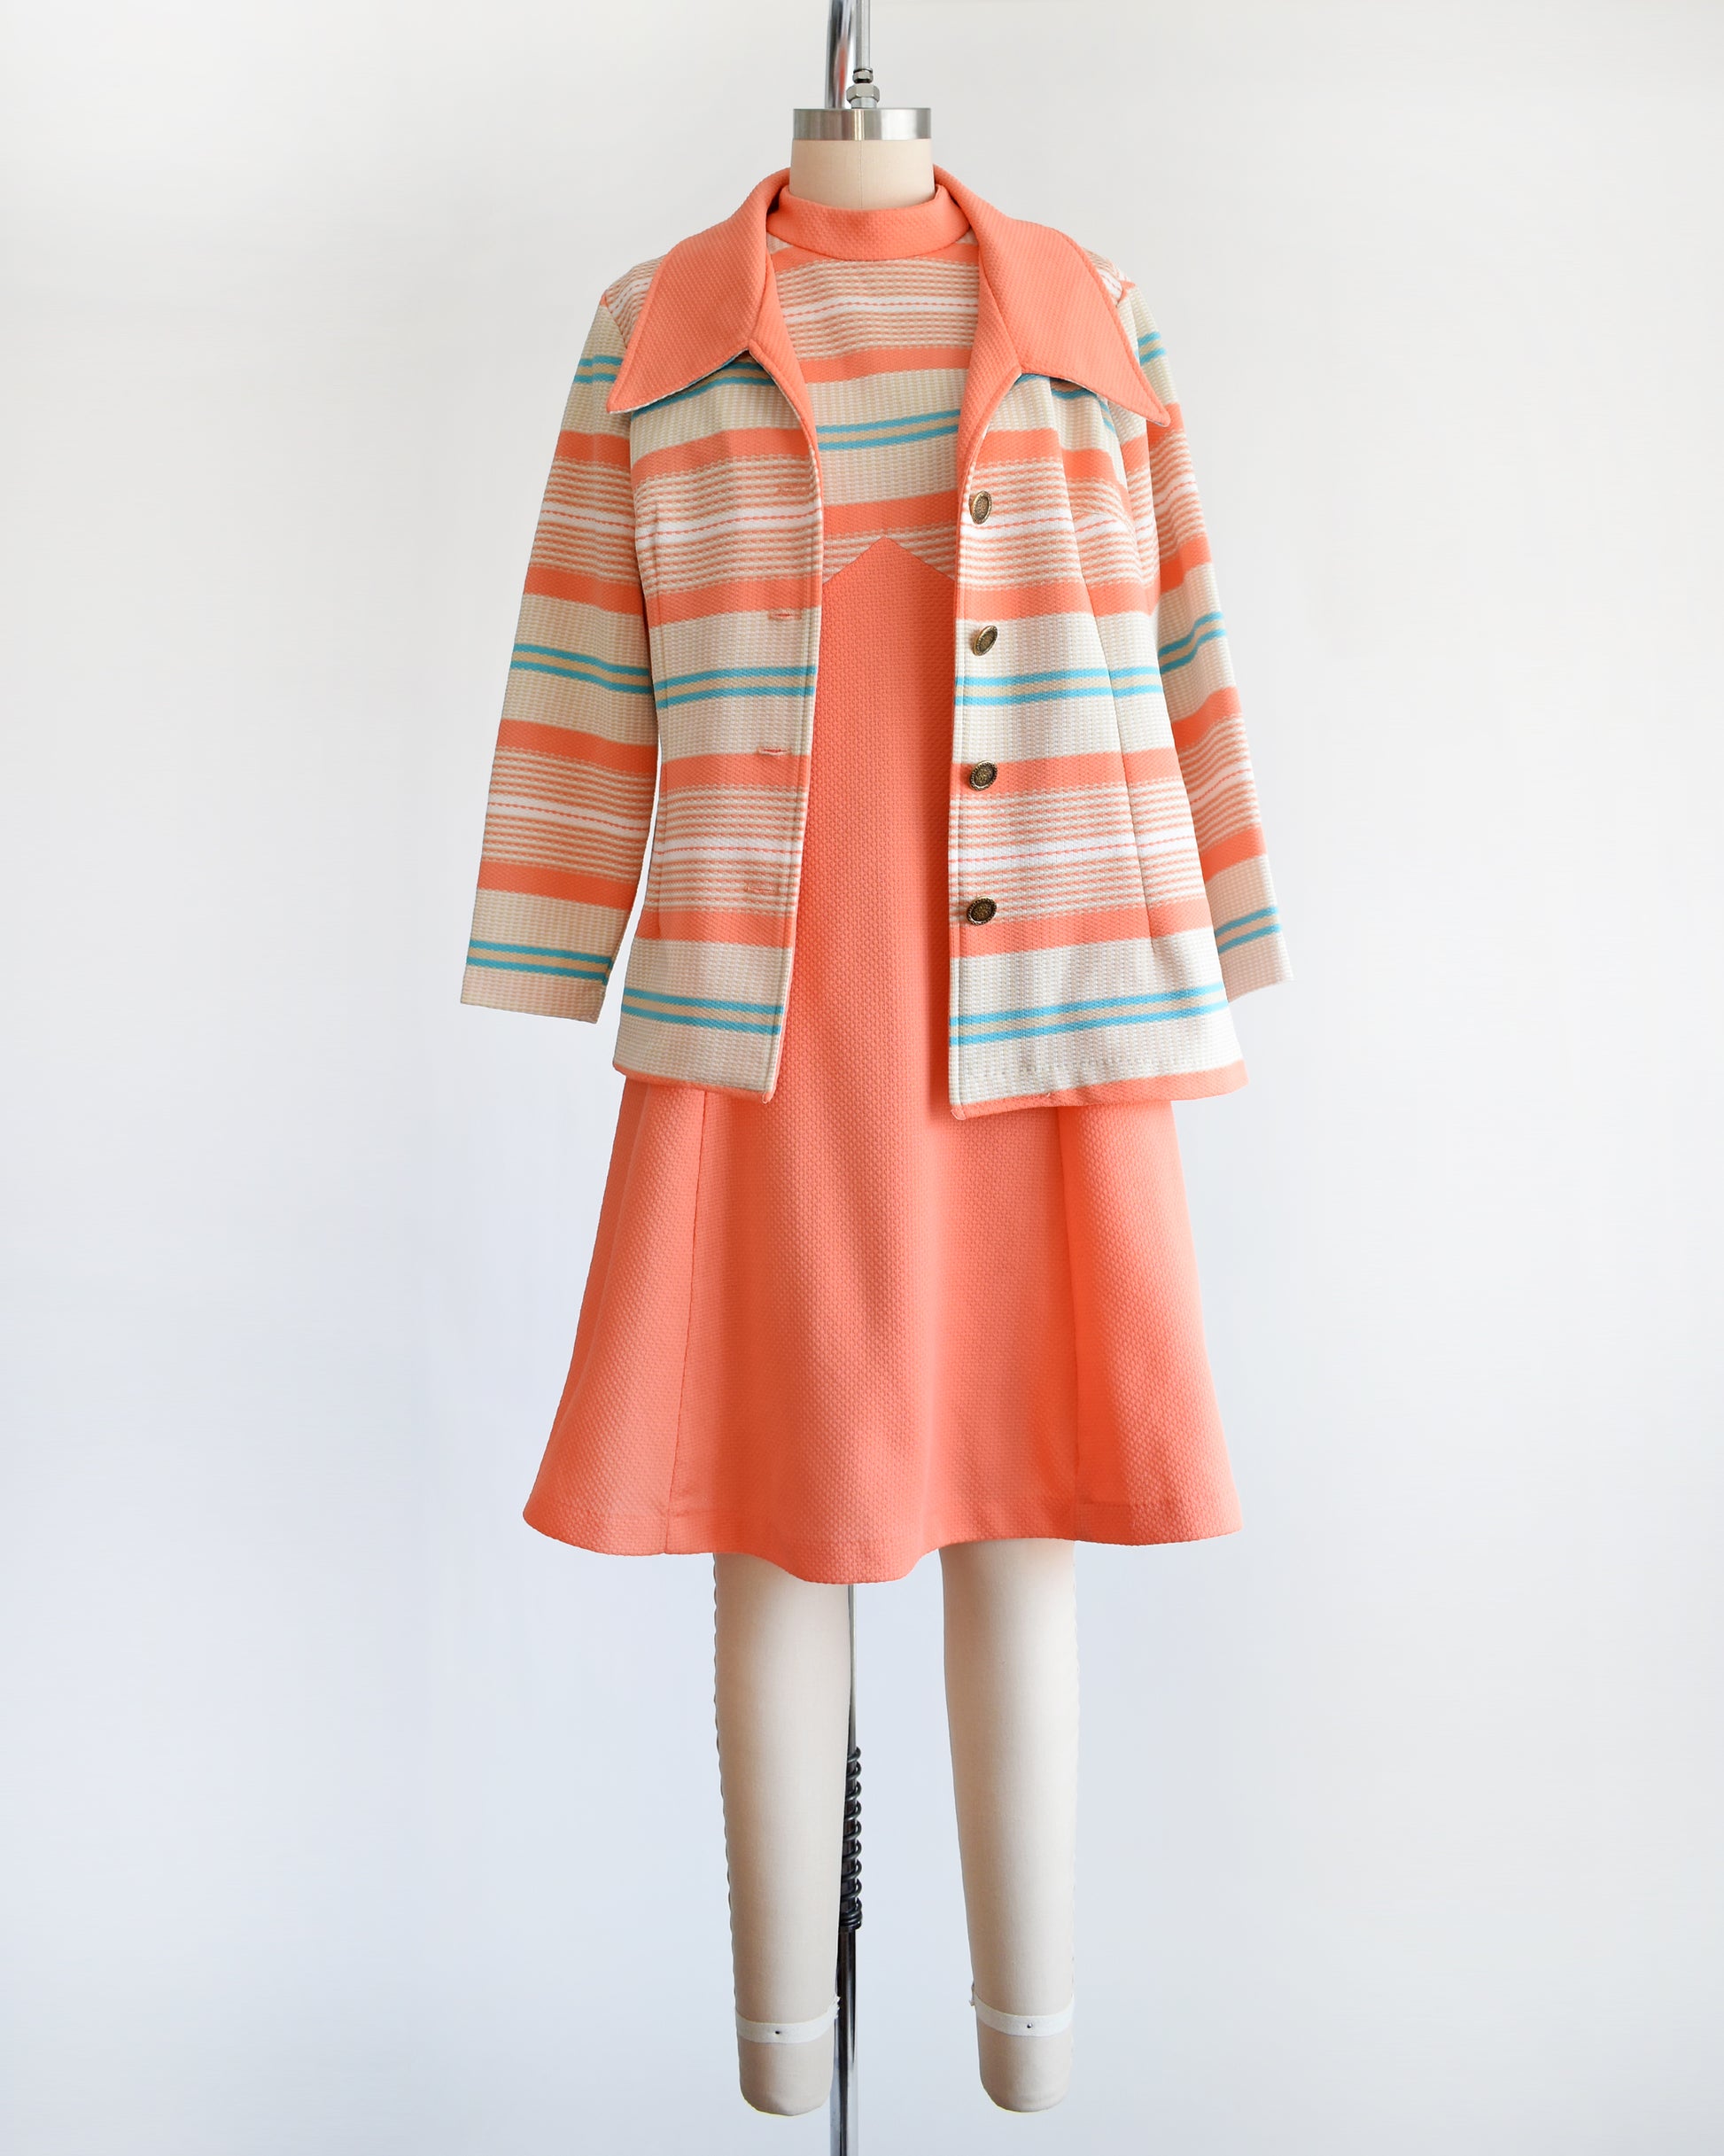 A vintage 1970s peach and blue mod dress set. This set comes with a peach, tan, blue, and white horizontal striped jacket and matching dress.